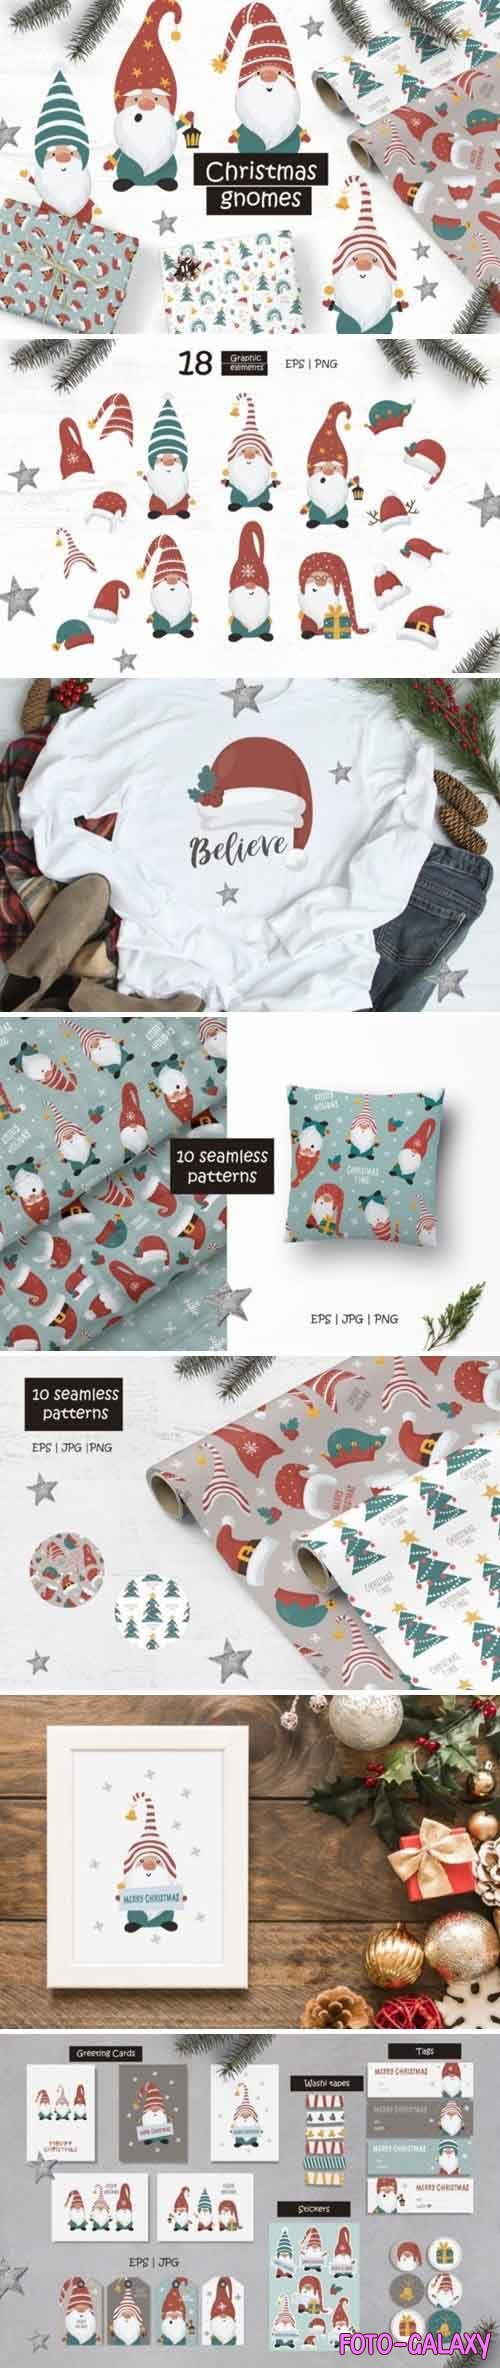 Christmas Gnomes and Patterns - 5652971